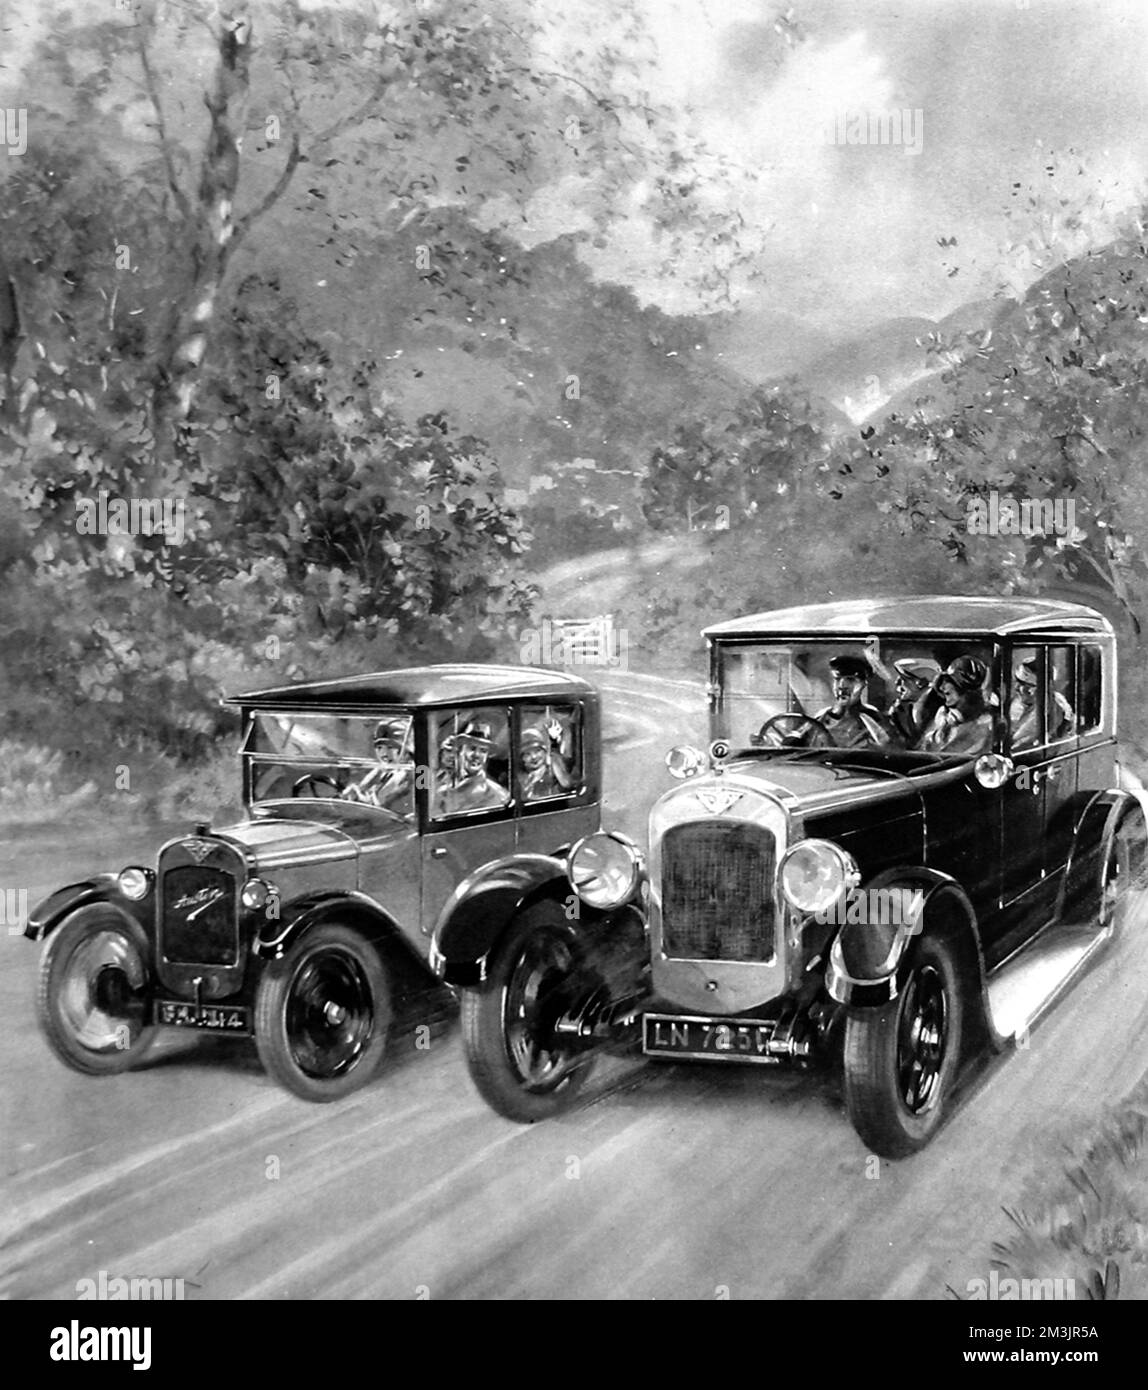 The universality of car ownership in 1926, by showing a large and a small car both made by Austin. By this time car ownership was becoming more accessible to those with lower incomes by the production of smaller cars such as the one illustrated on the left.  1926 Stock Photo